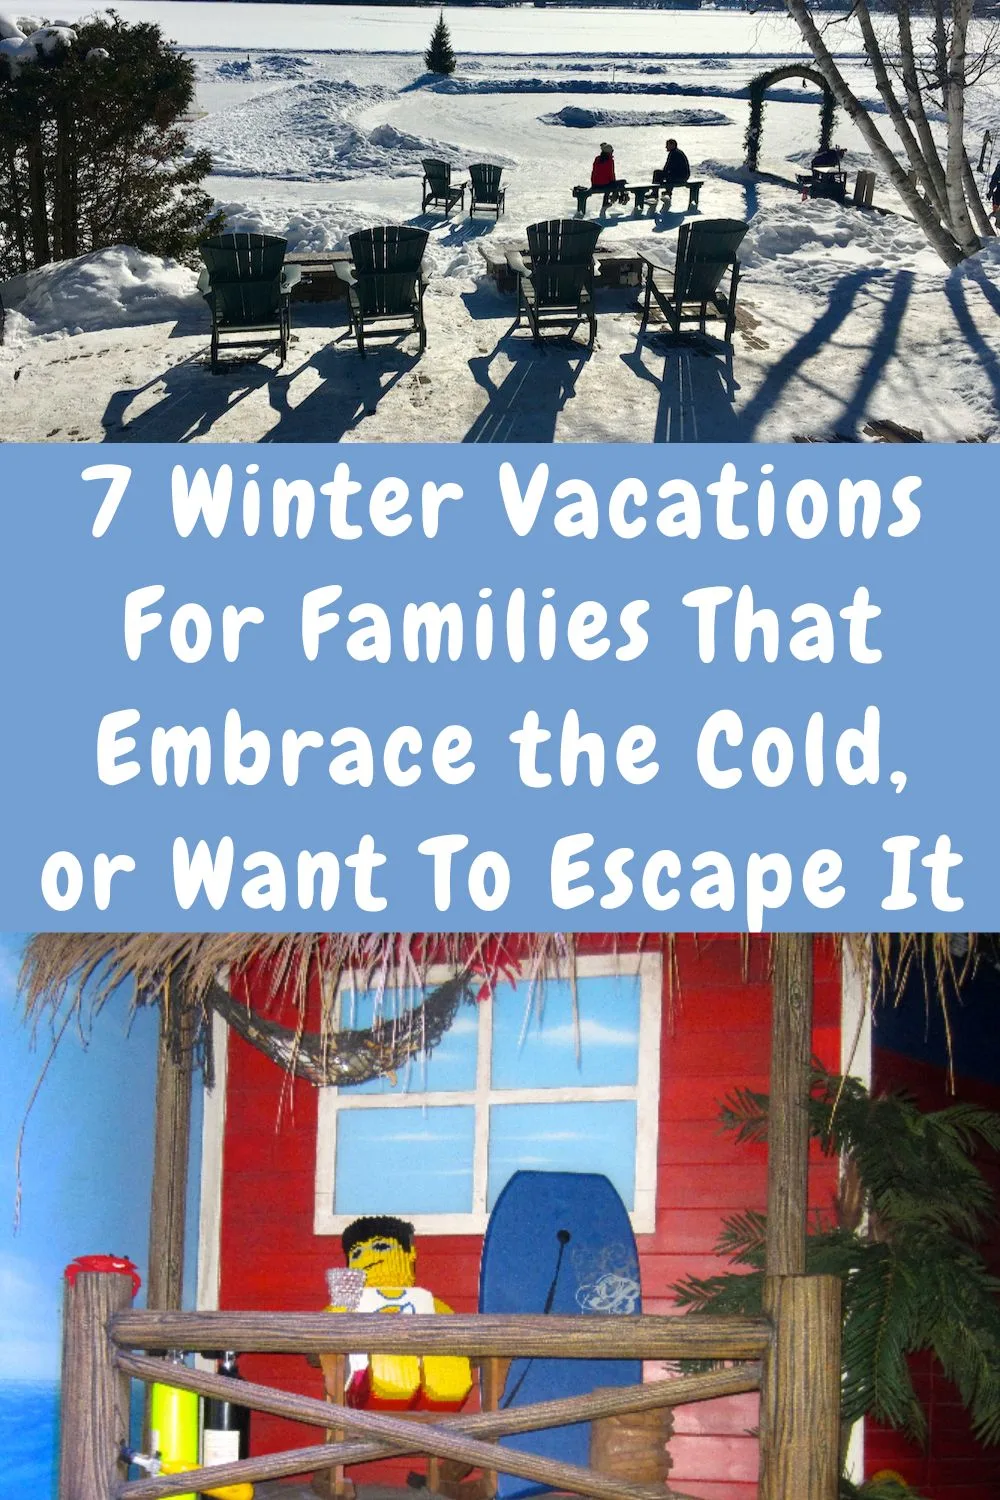 here are 7 surprising winter vacations with kids: choose to  embrace the cold,escape to someplace warm or take advantage of off-season discounts